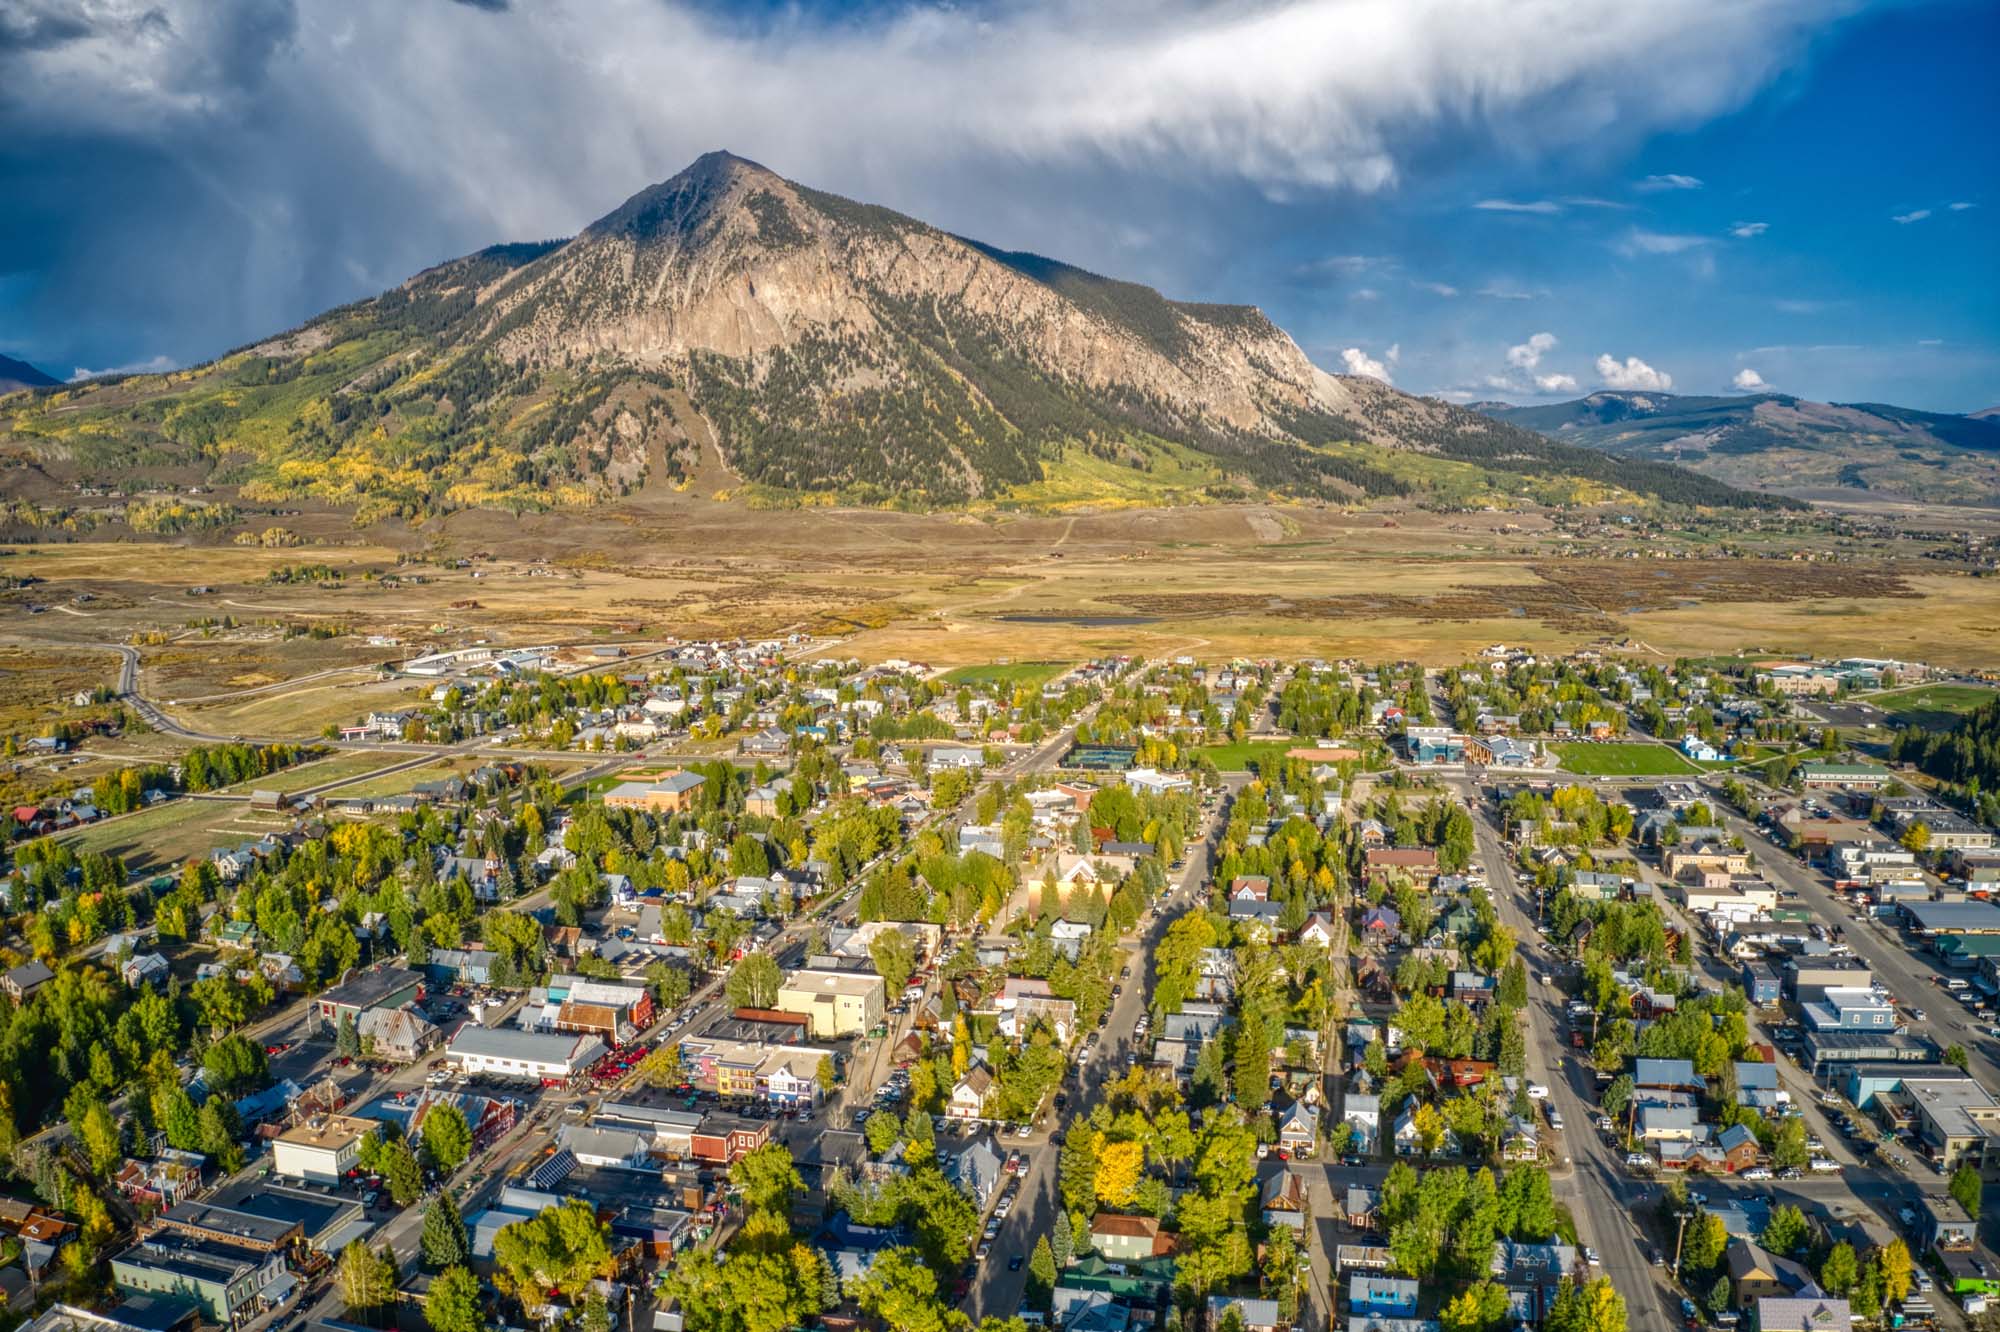 Aerial View Of The Popular Ski Town Of Crested Butte